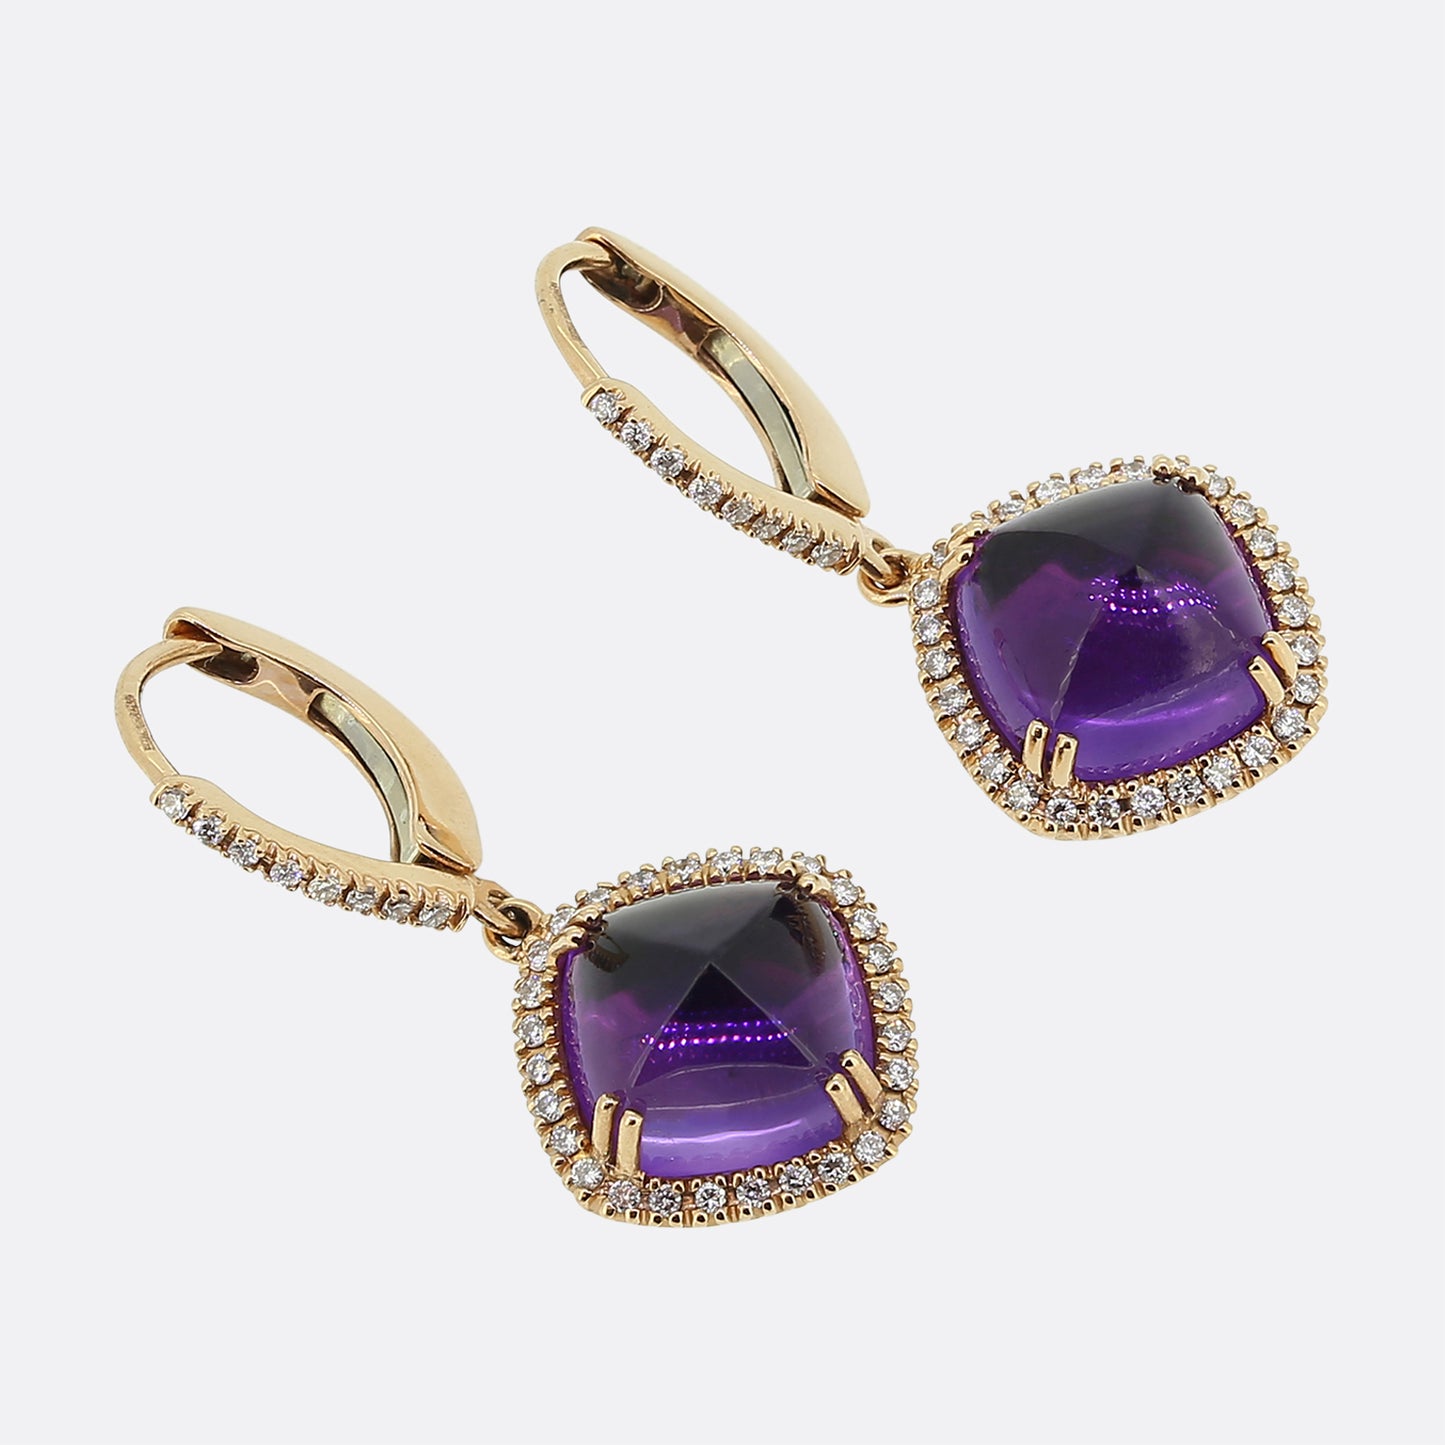 Sugarloaf Cabochon Amethyst and Diamond Earrings